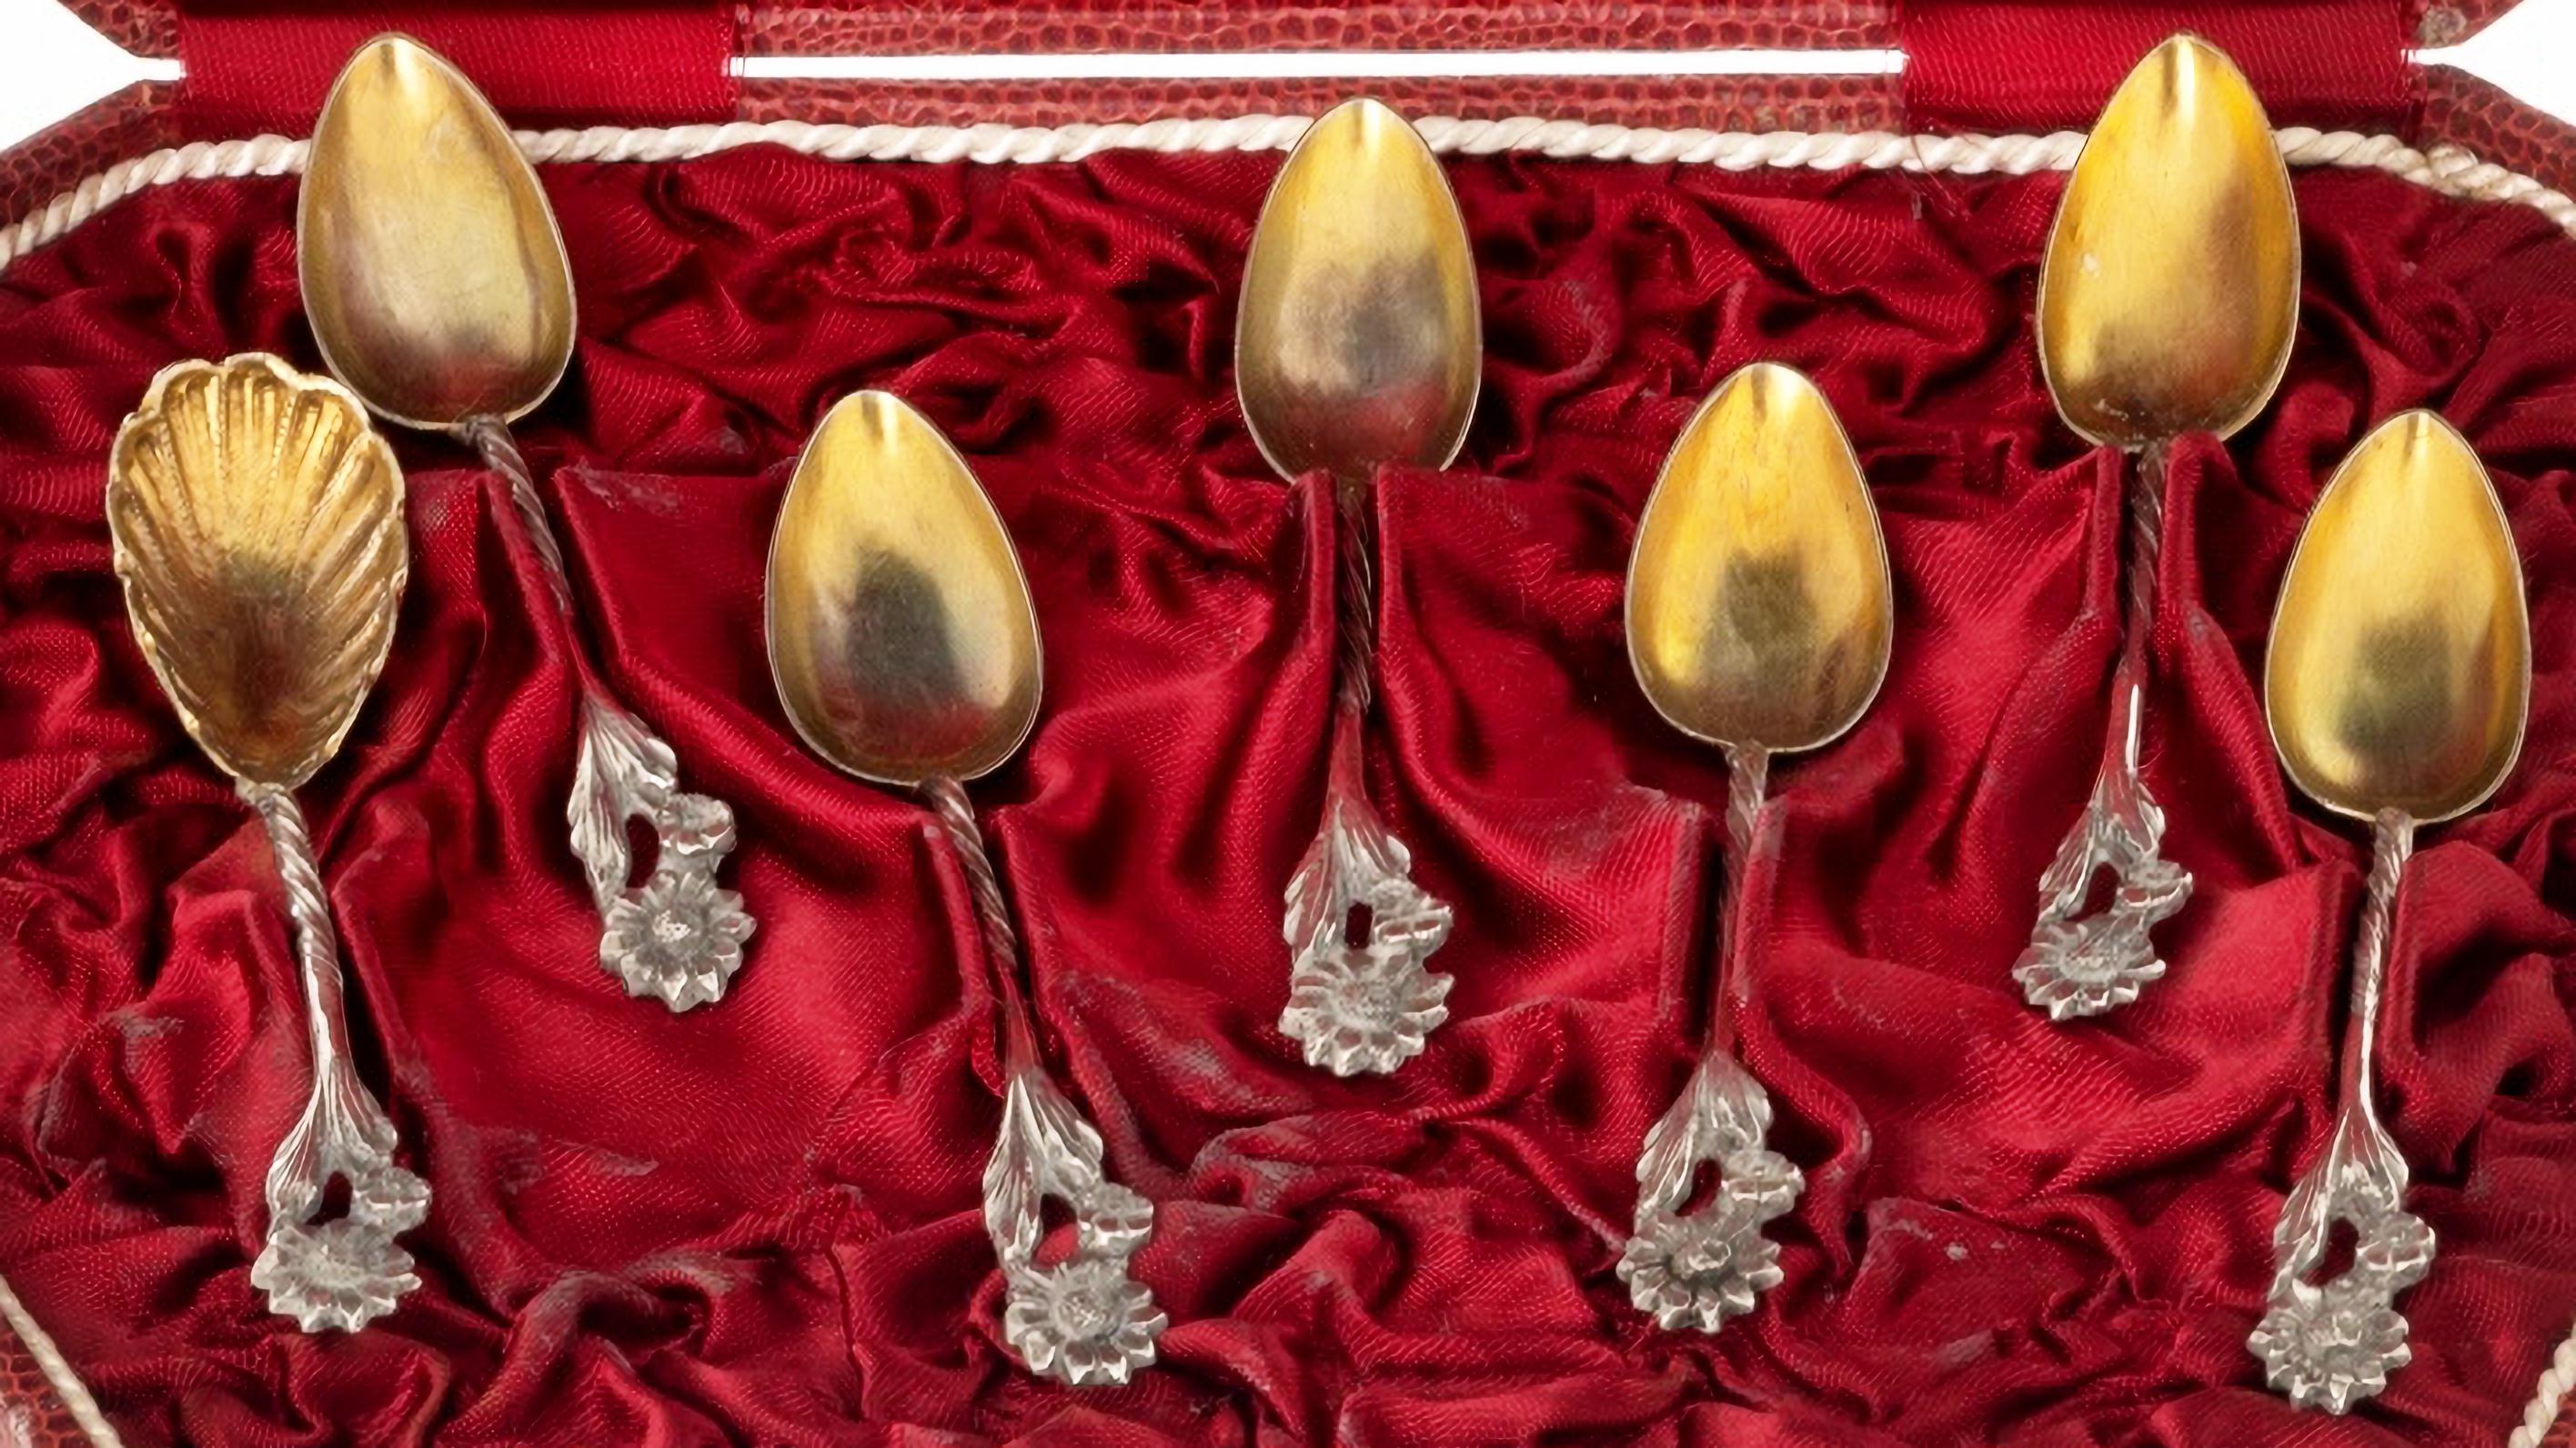 SET OF SIX SPOONS AND LADLE IN PORTUGUESE SILVER

19th Century
with relief and openwork decoration with 'Boar II' hallmarks of 833 milesimas, dated 1887-1937.
In original case.
Signs of use.
Approx. weight: 63.7 g Dim. max.: 10 to 12 cm
good